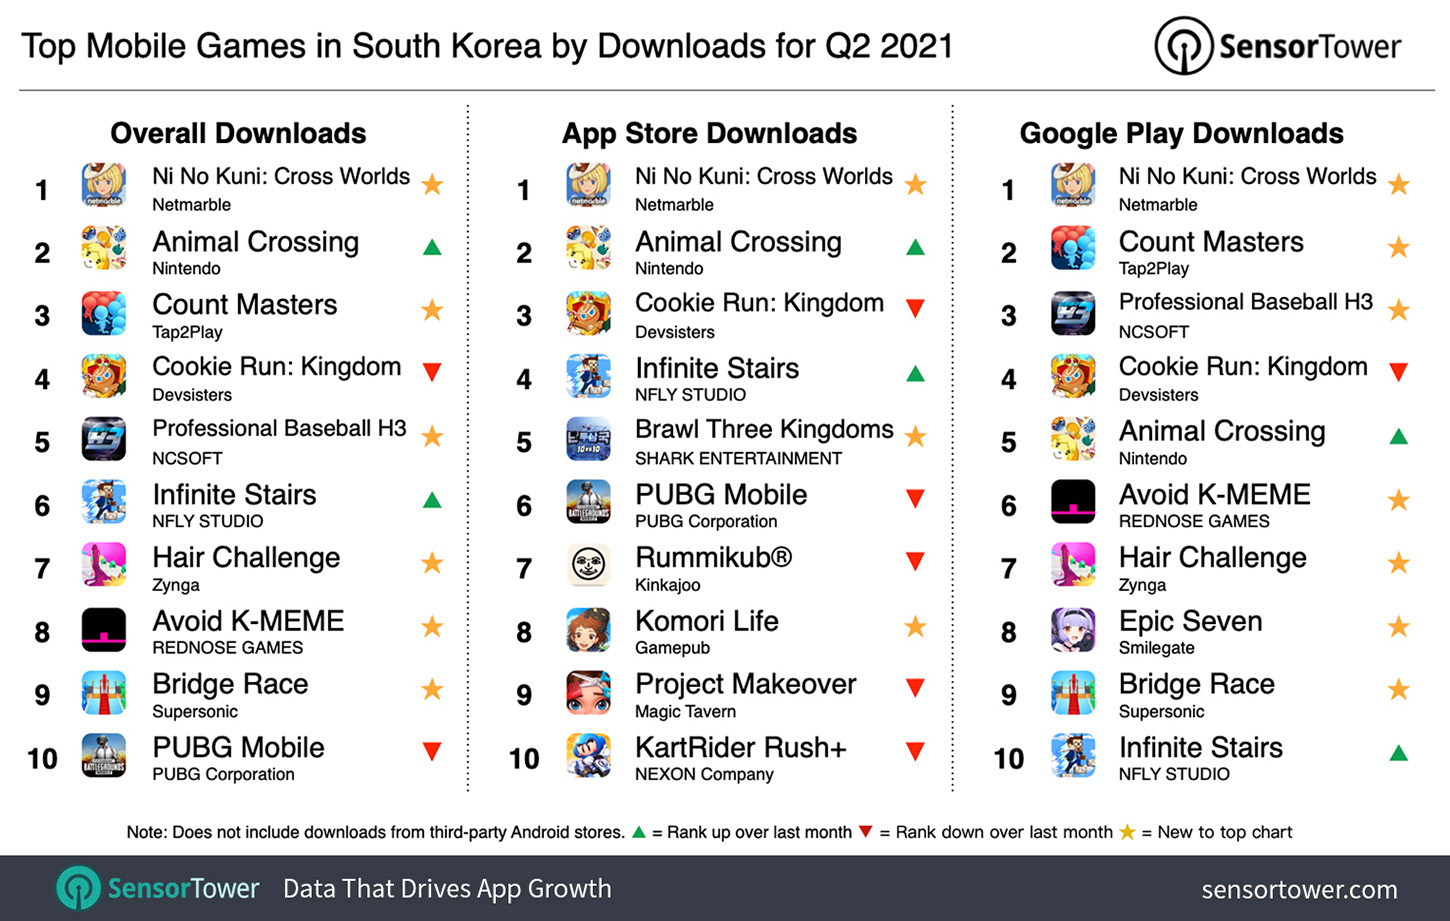 Top Mobile Games in South Korea for Q2 2021 by Downloads